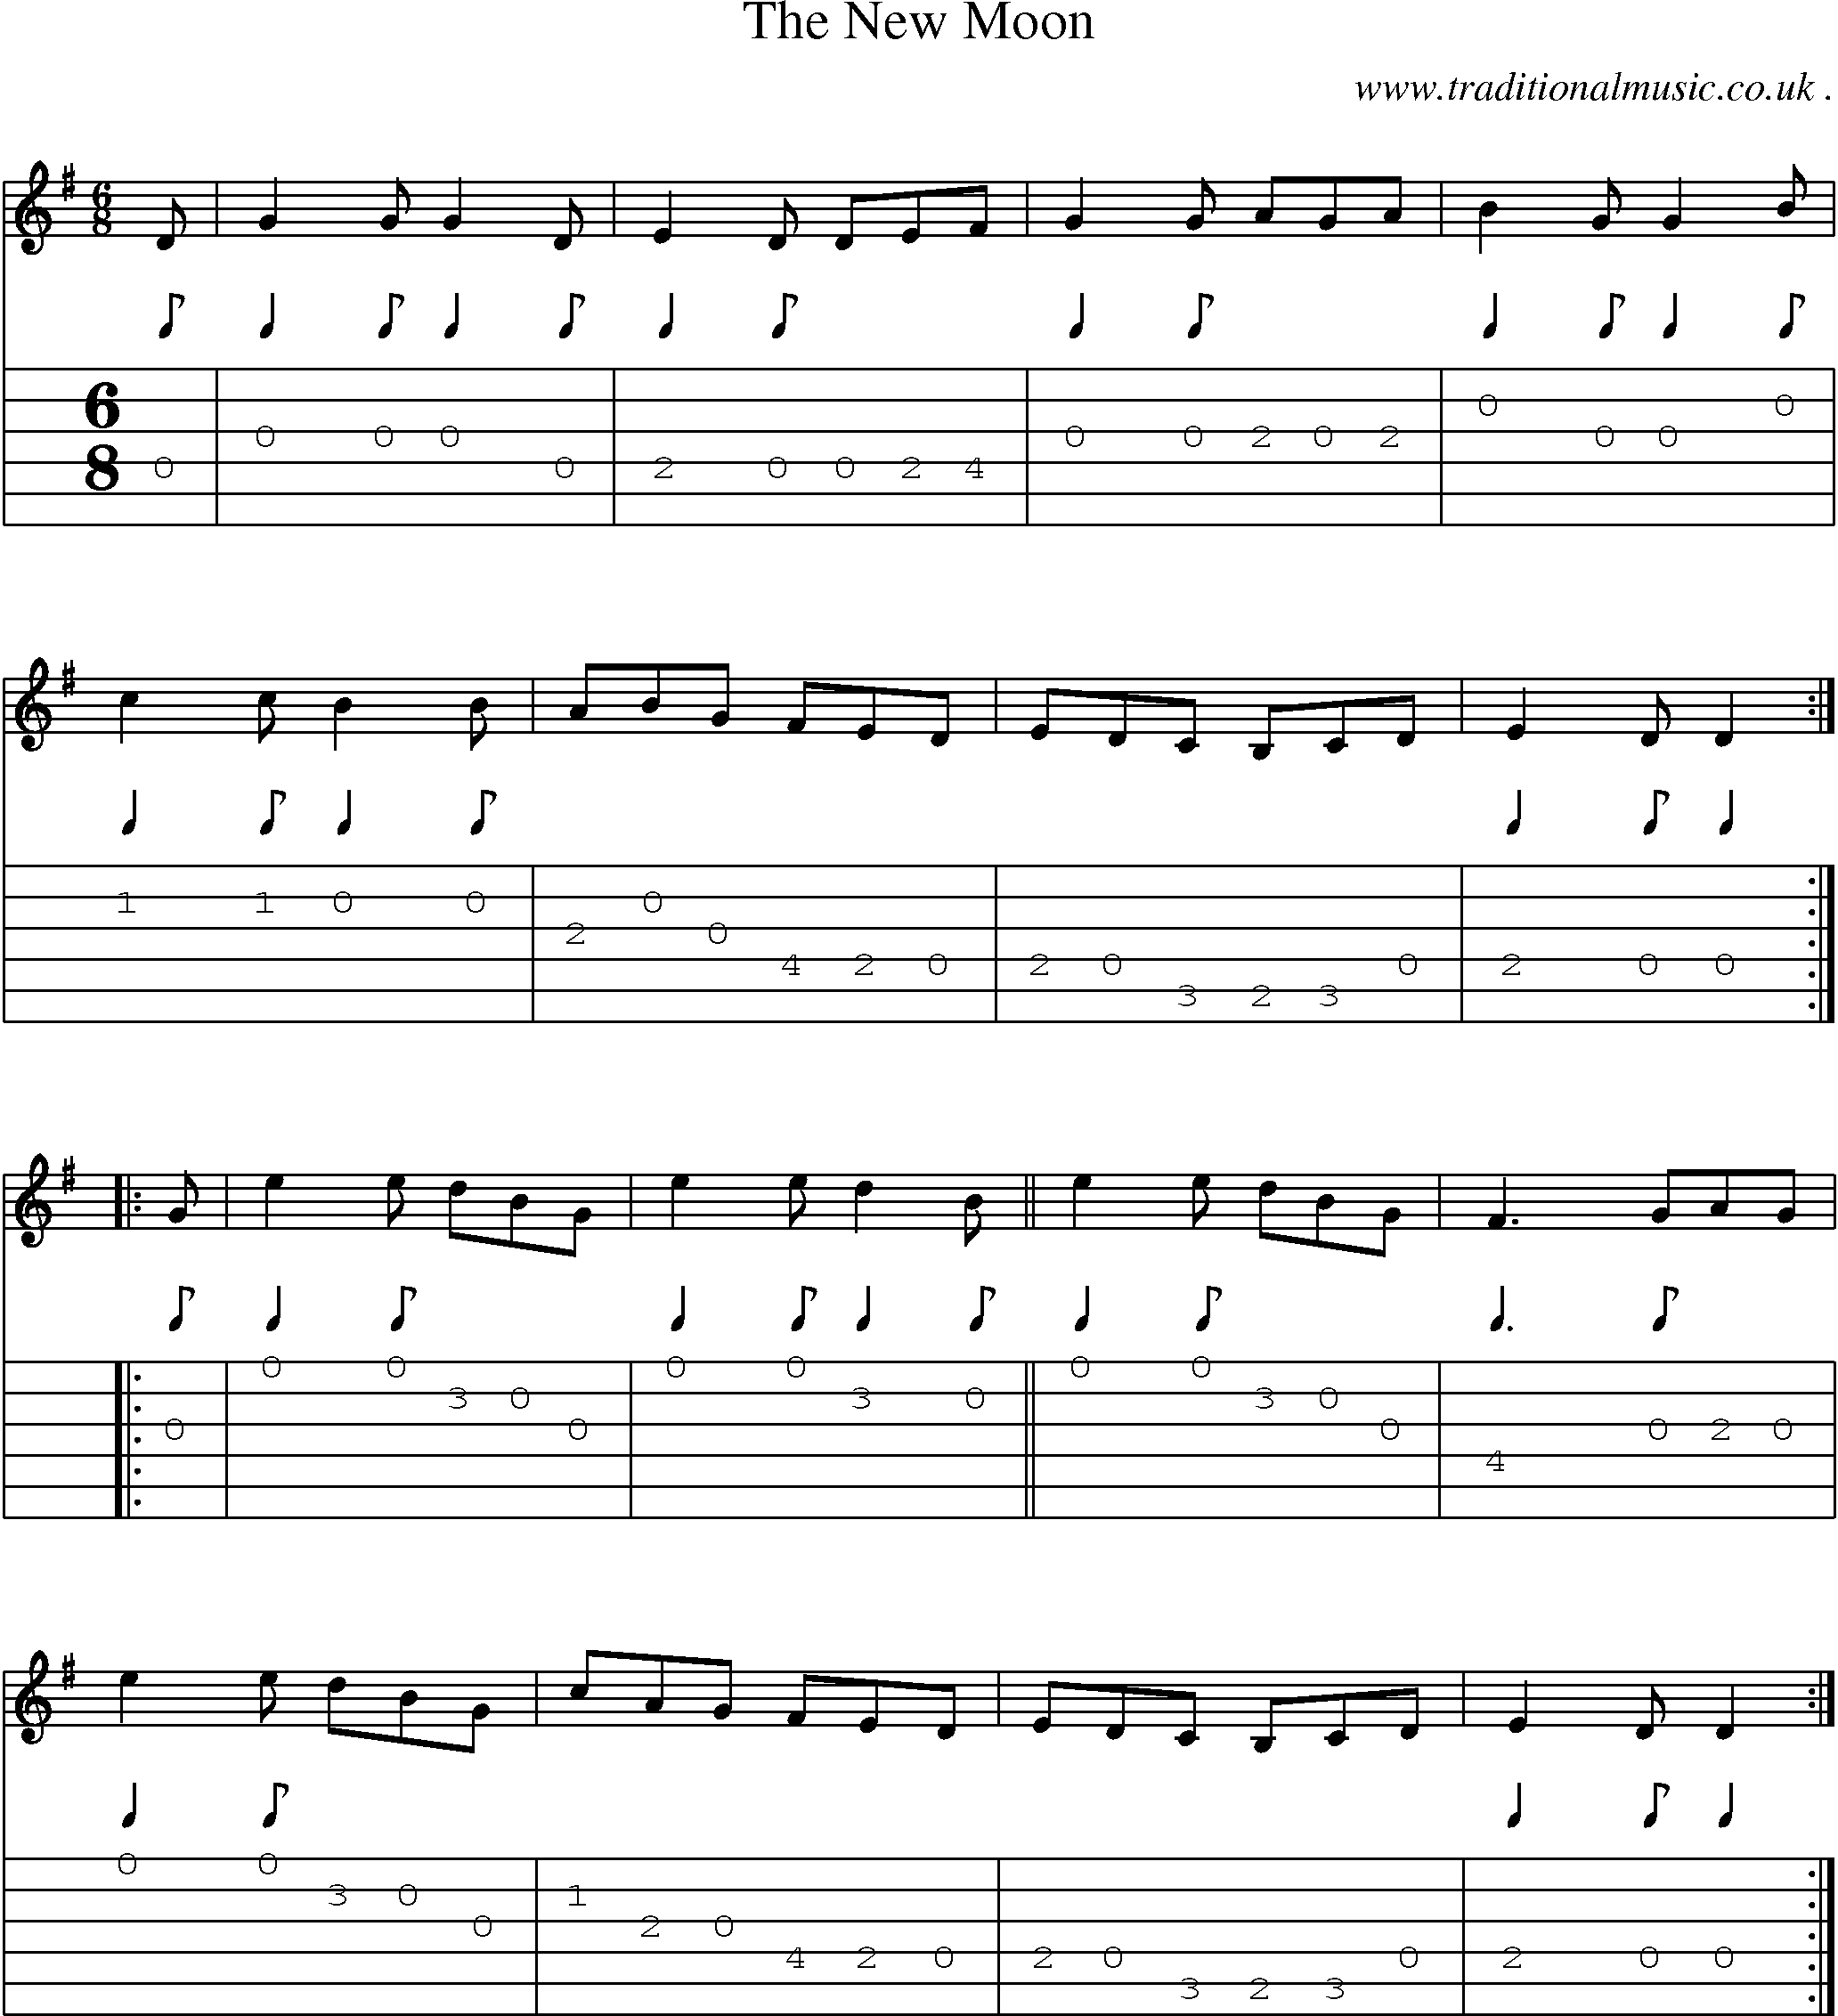 Sheet-Music and Guitar Tabs for The New Moon